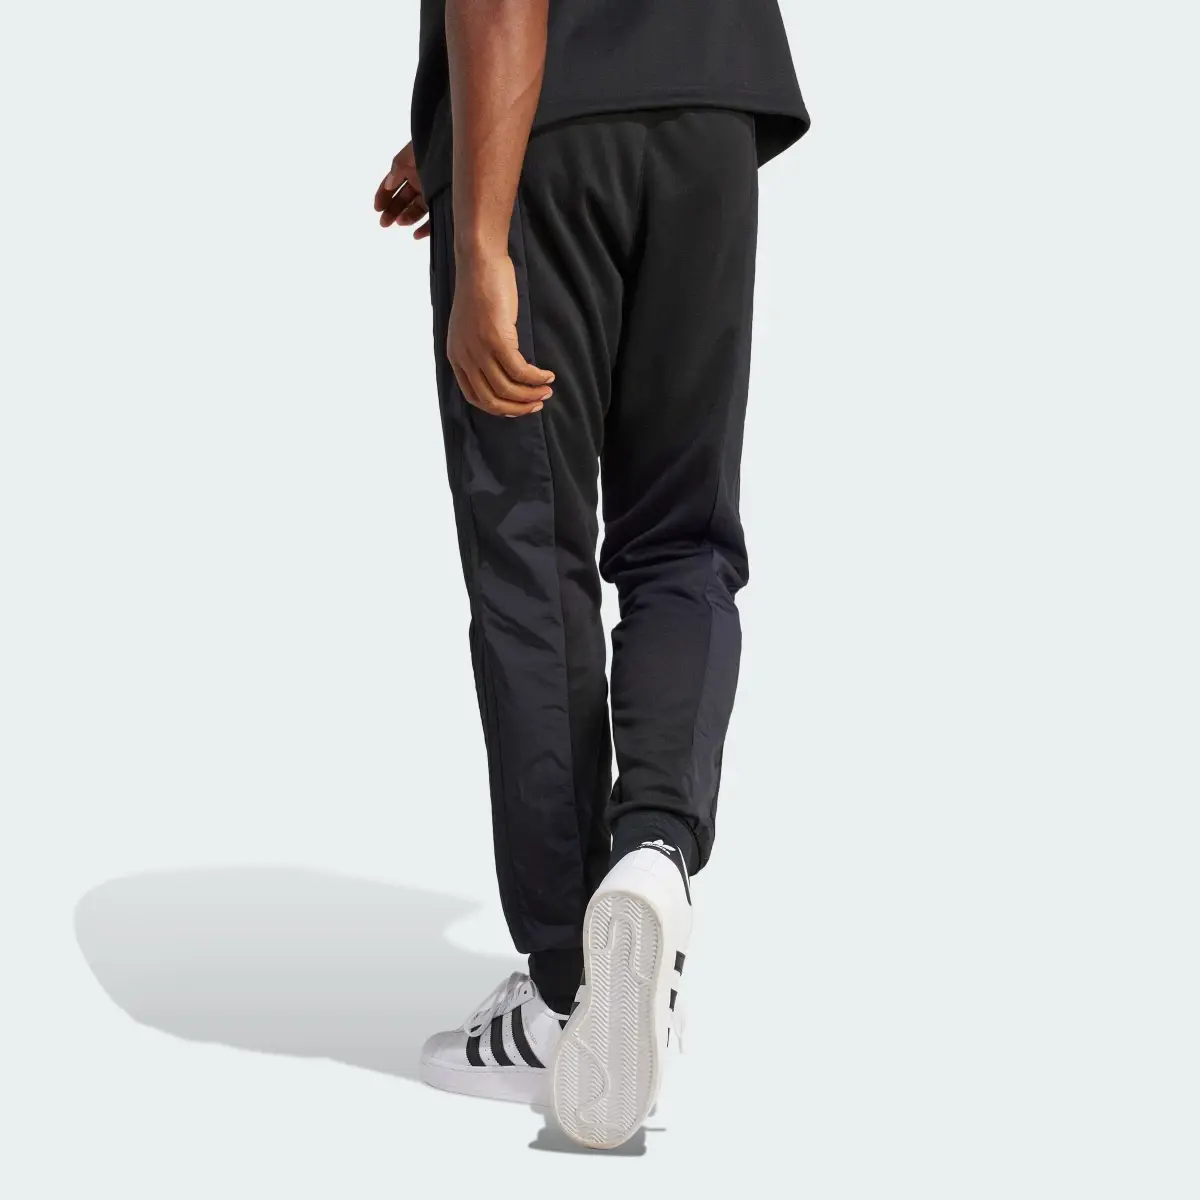 Adidas Adicolor Re-Pro SST Material Mix Tracksuit Bottoms. 2